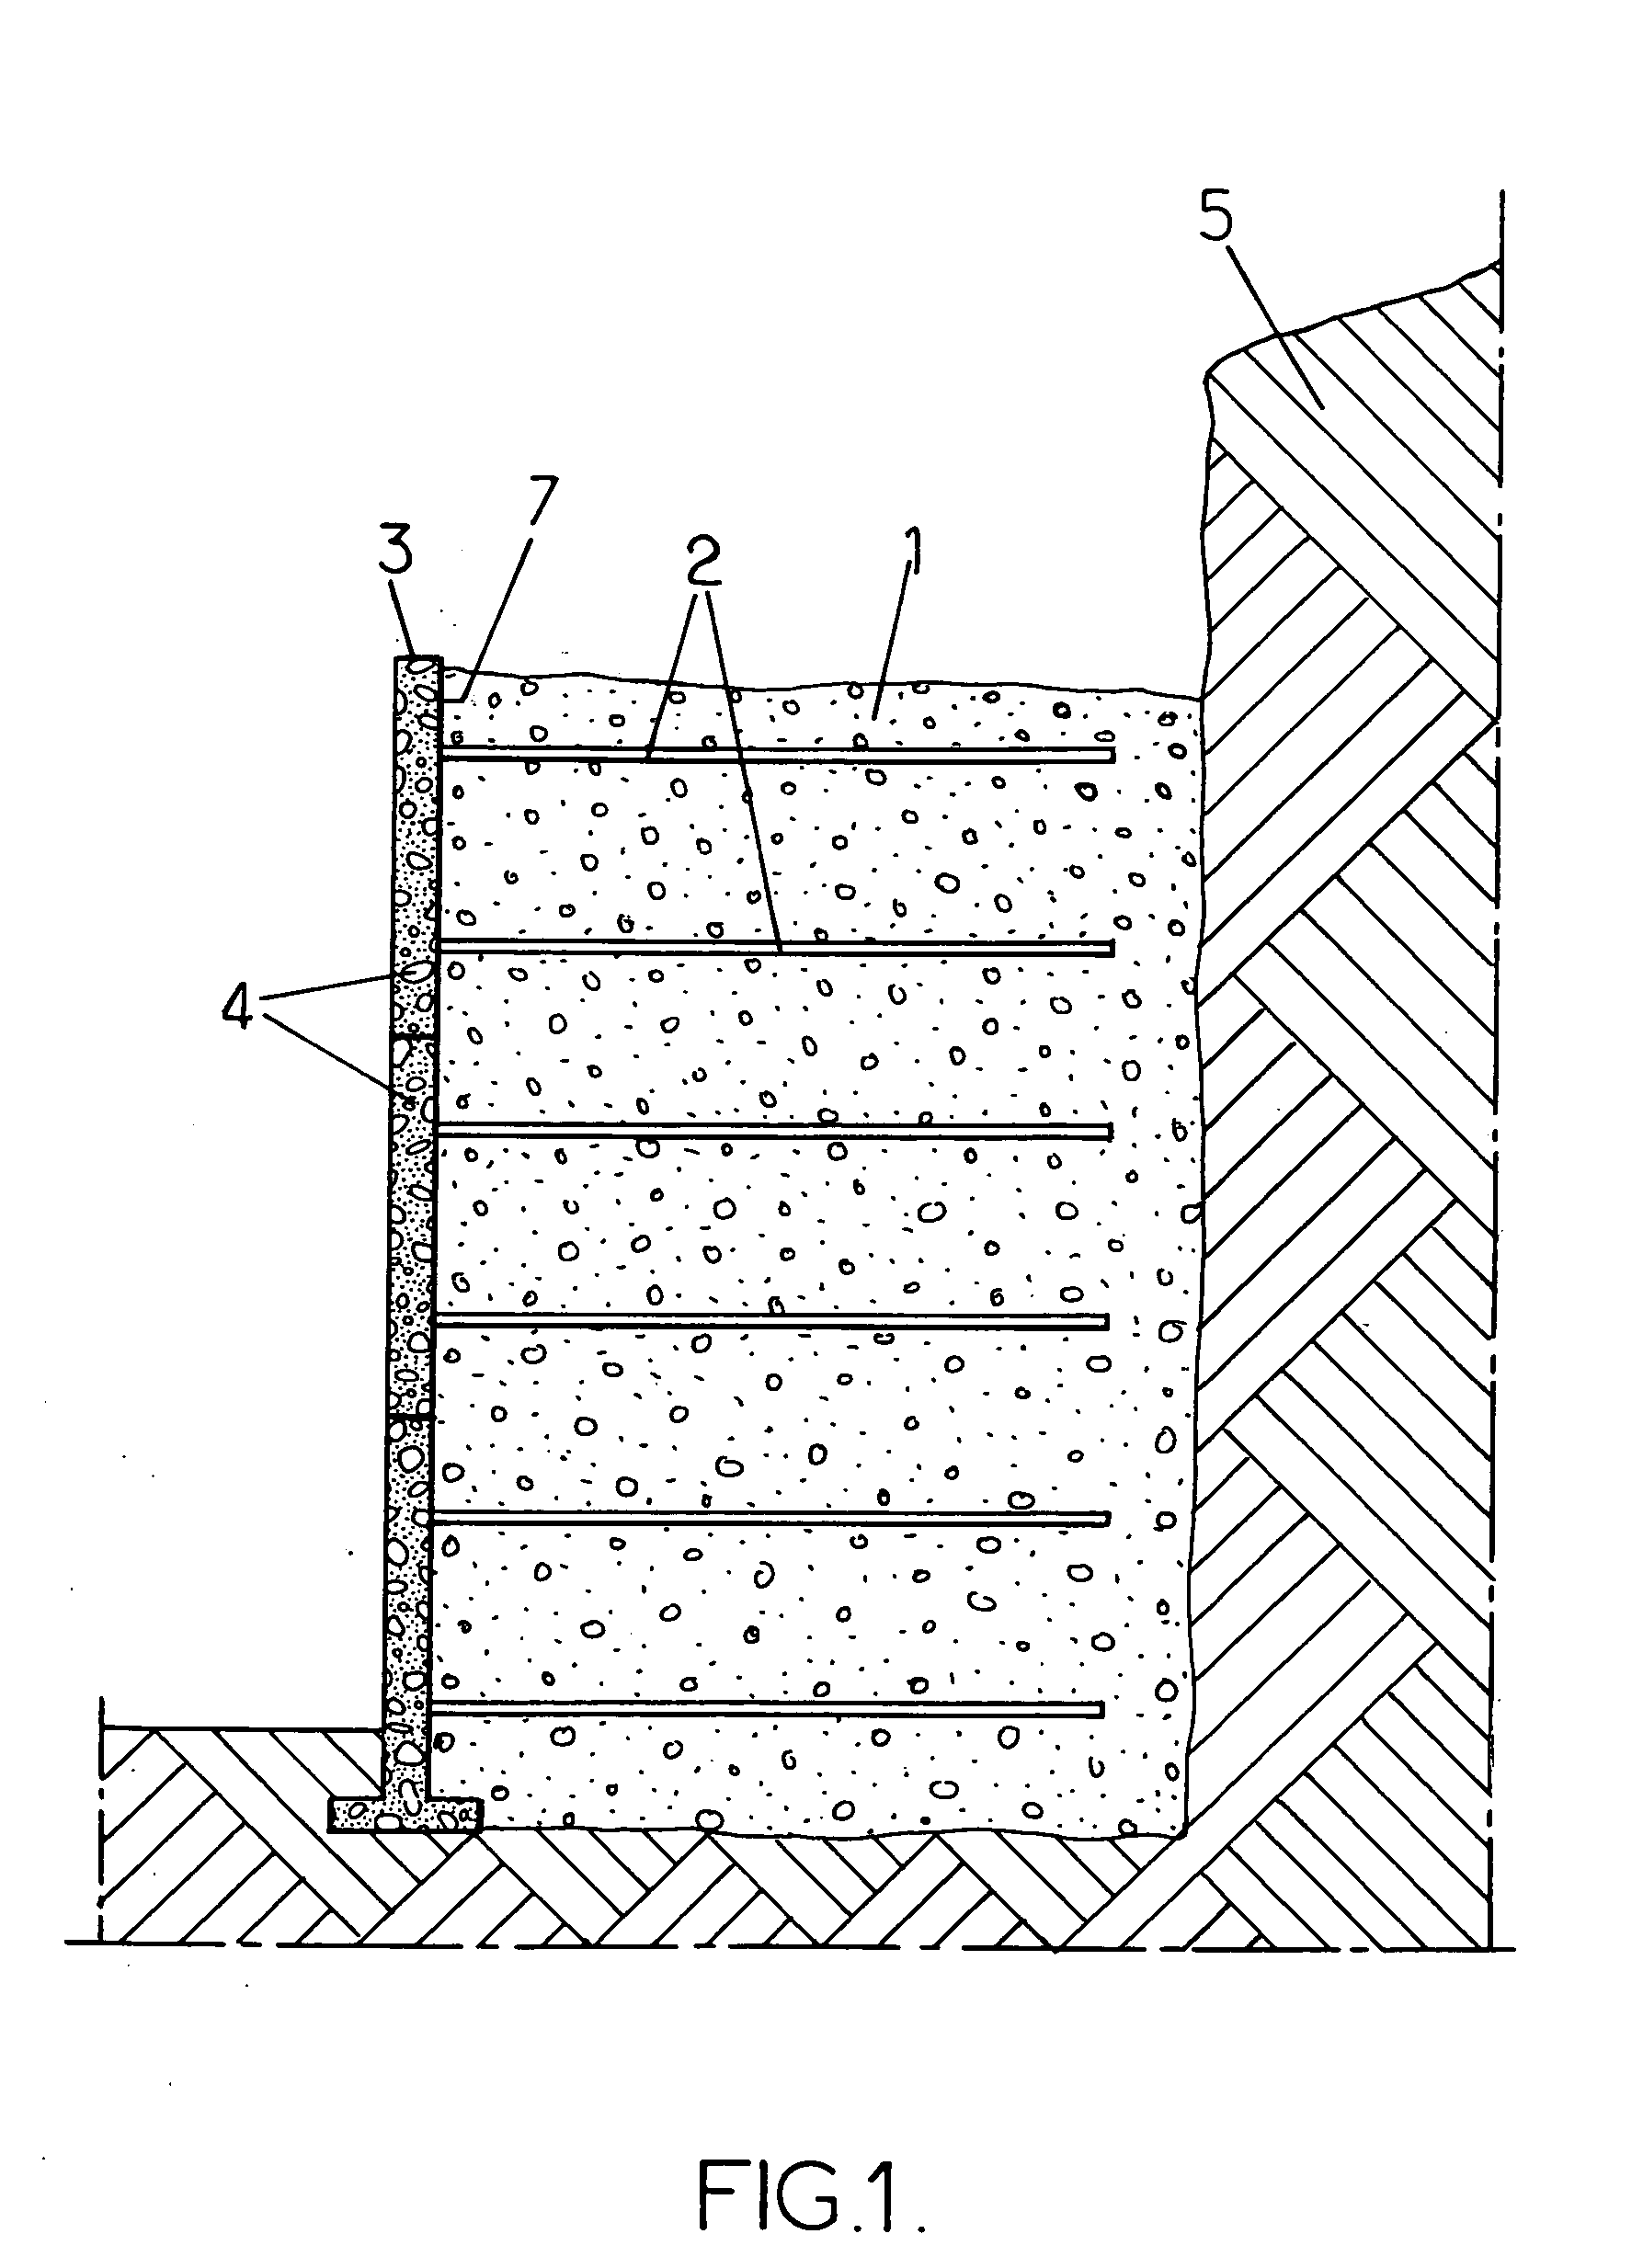 Stabilized soil structure and facing elements for its construction